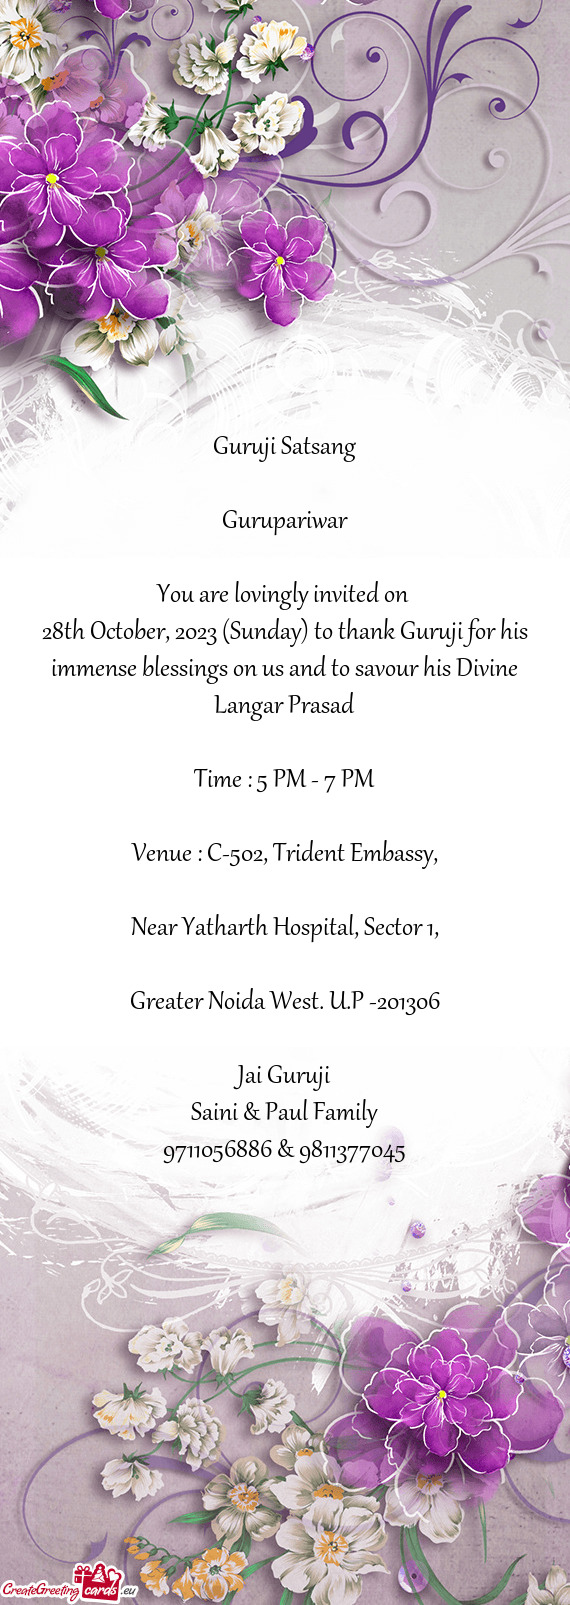 28th October, 2023 (Sunday) to thank Guruji for his immense blessings on us and to savour his Divine